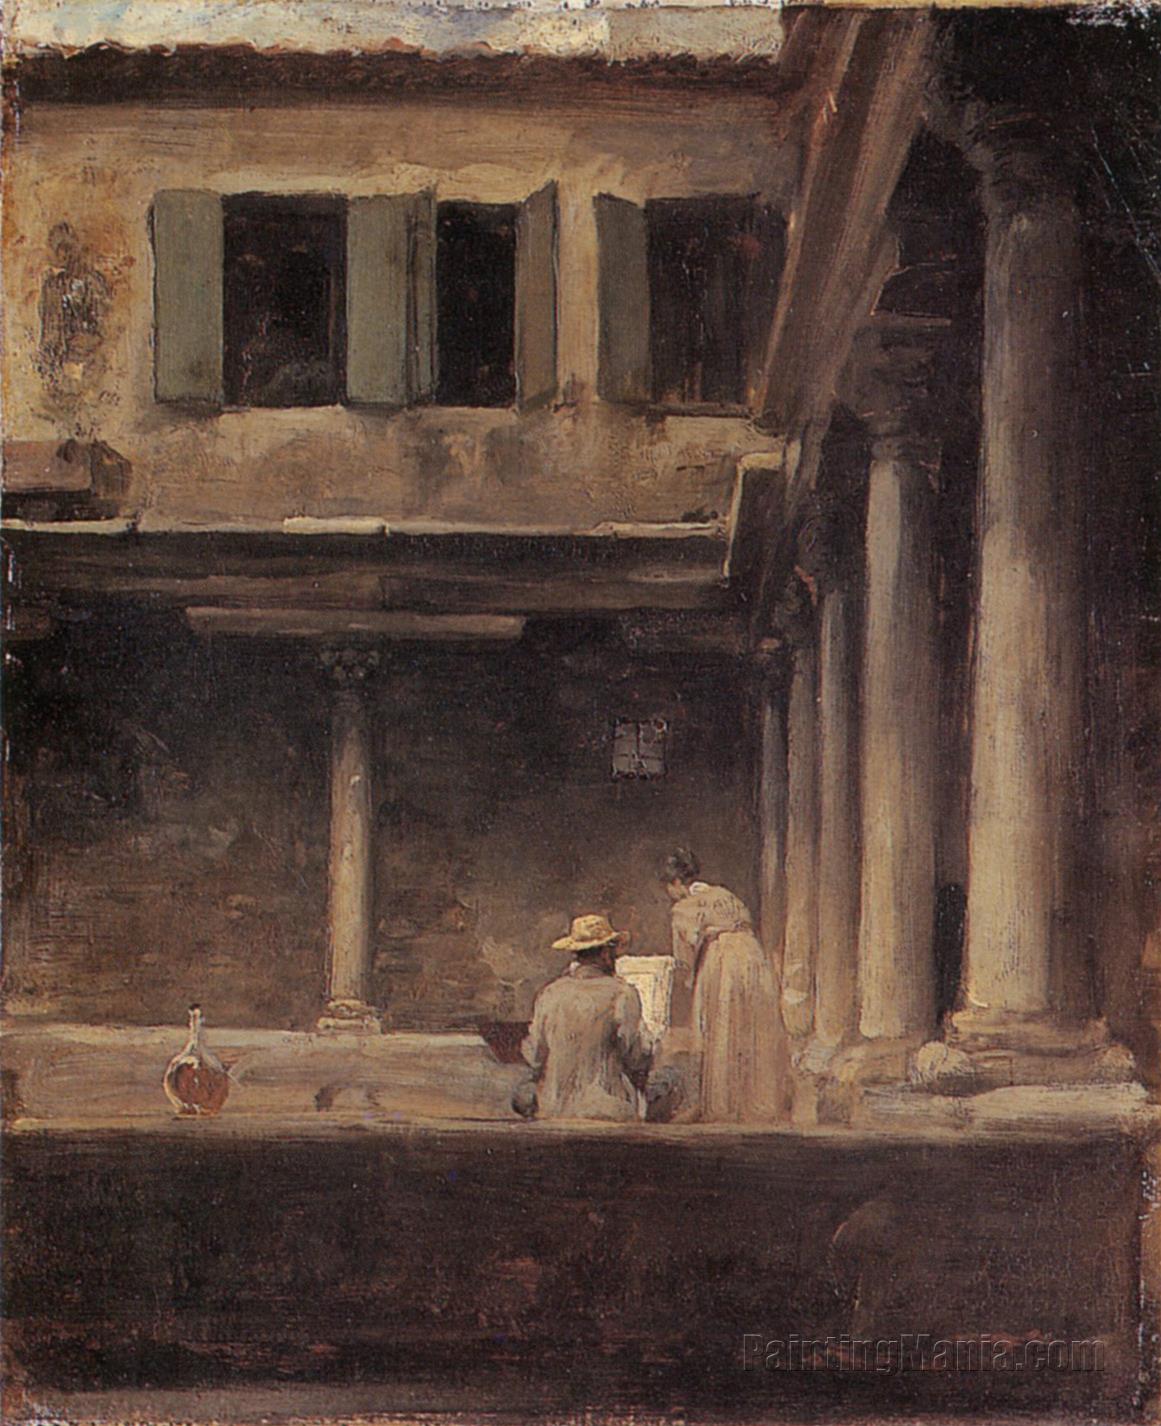 An Artist Sketching in the Cloister of S. Gregorio, Venice